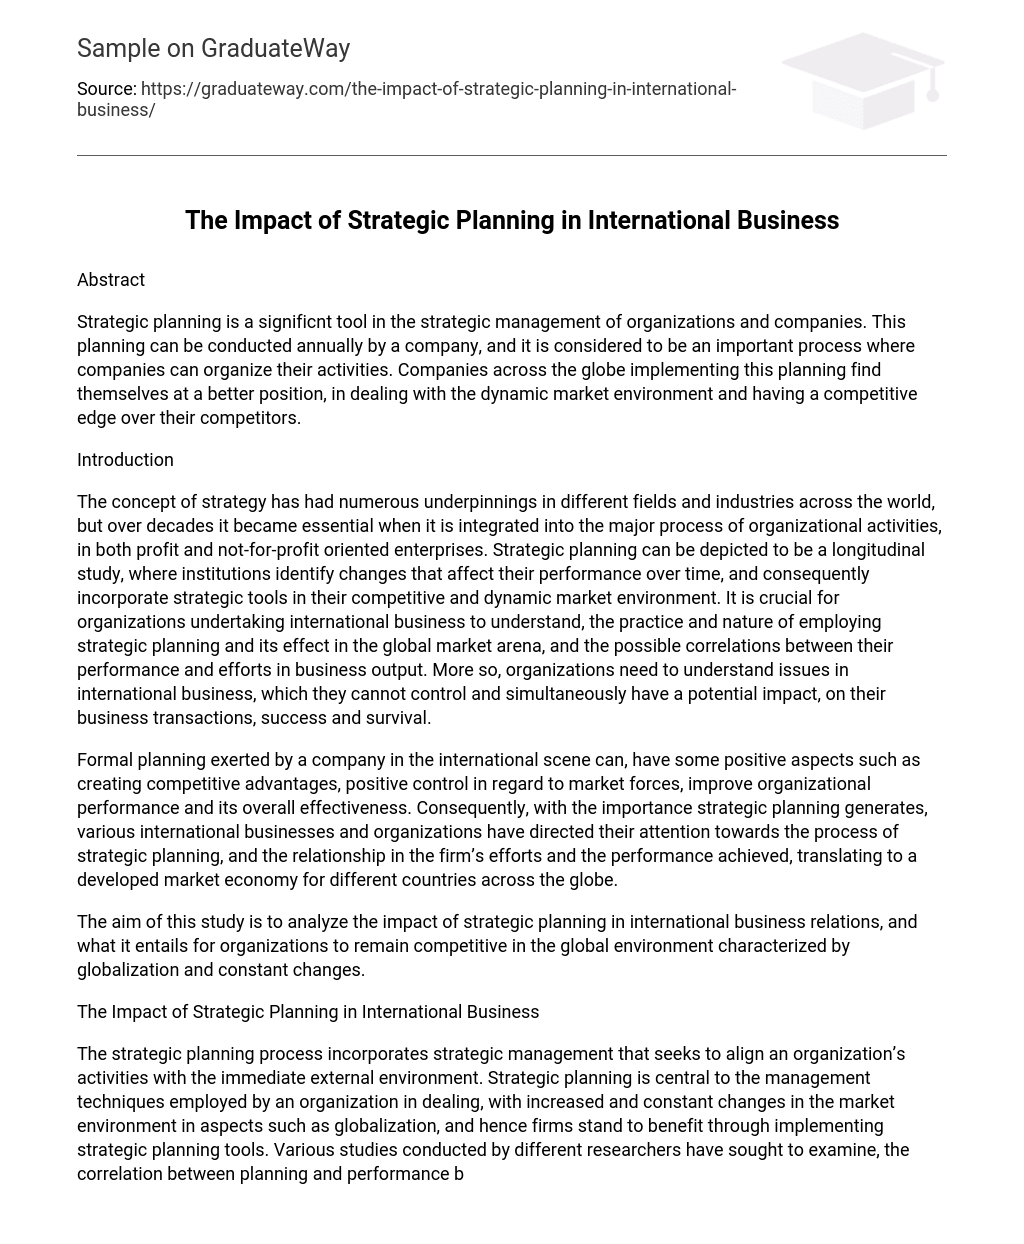 The Impact of Strategic Planning in International Business